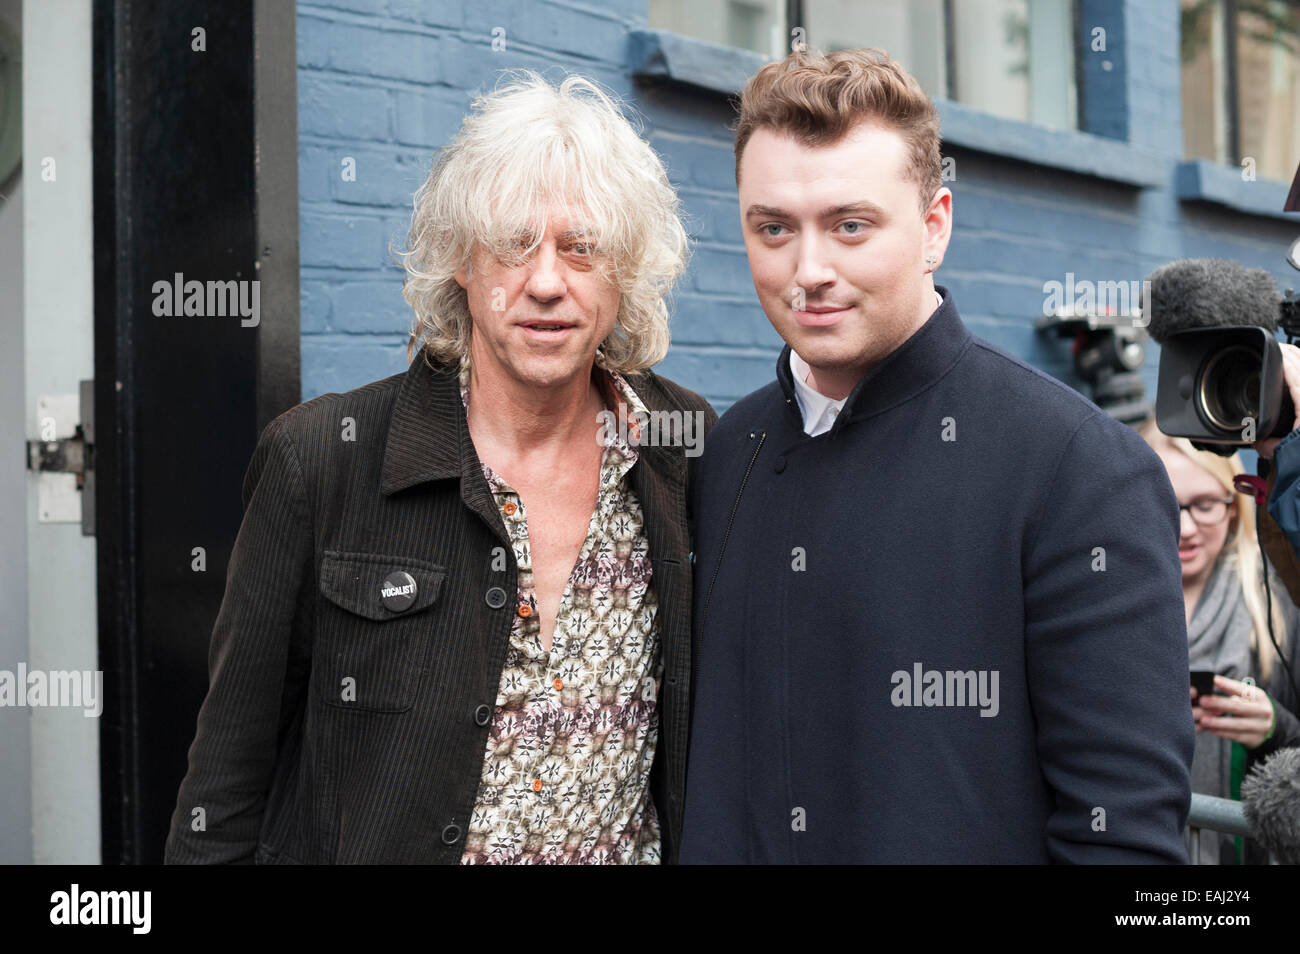 Basing Street, London, UK. 15th November 2014. Bob Geldof greets  Sam Smith outside Sarm Studios for the recording session of the updated Band Aid single. Credit:  Lee Thomas/Alamy Live News Stock Photo